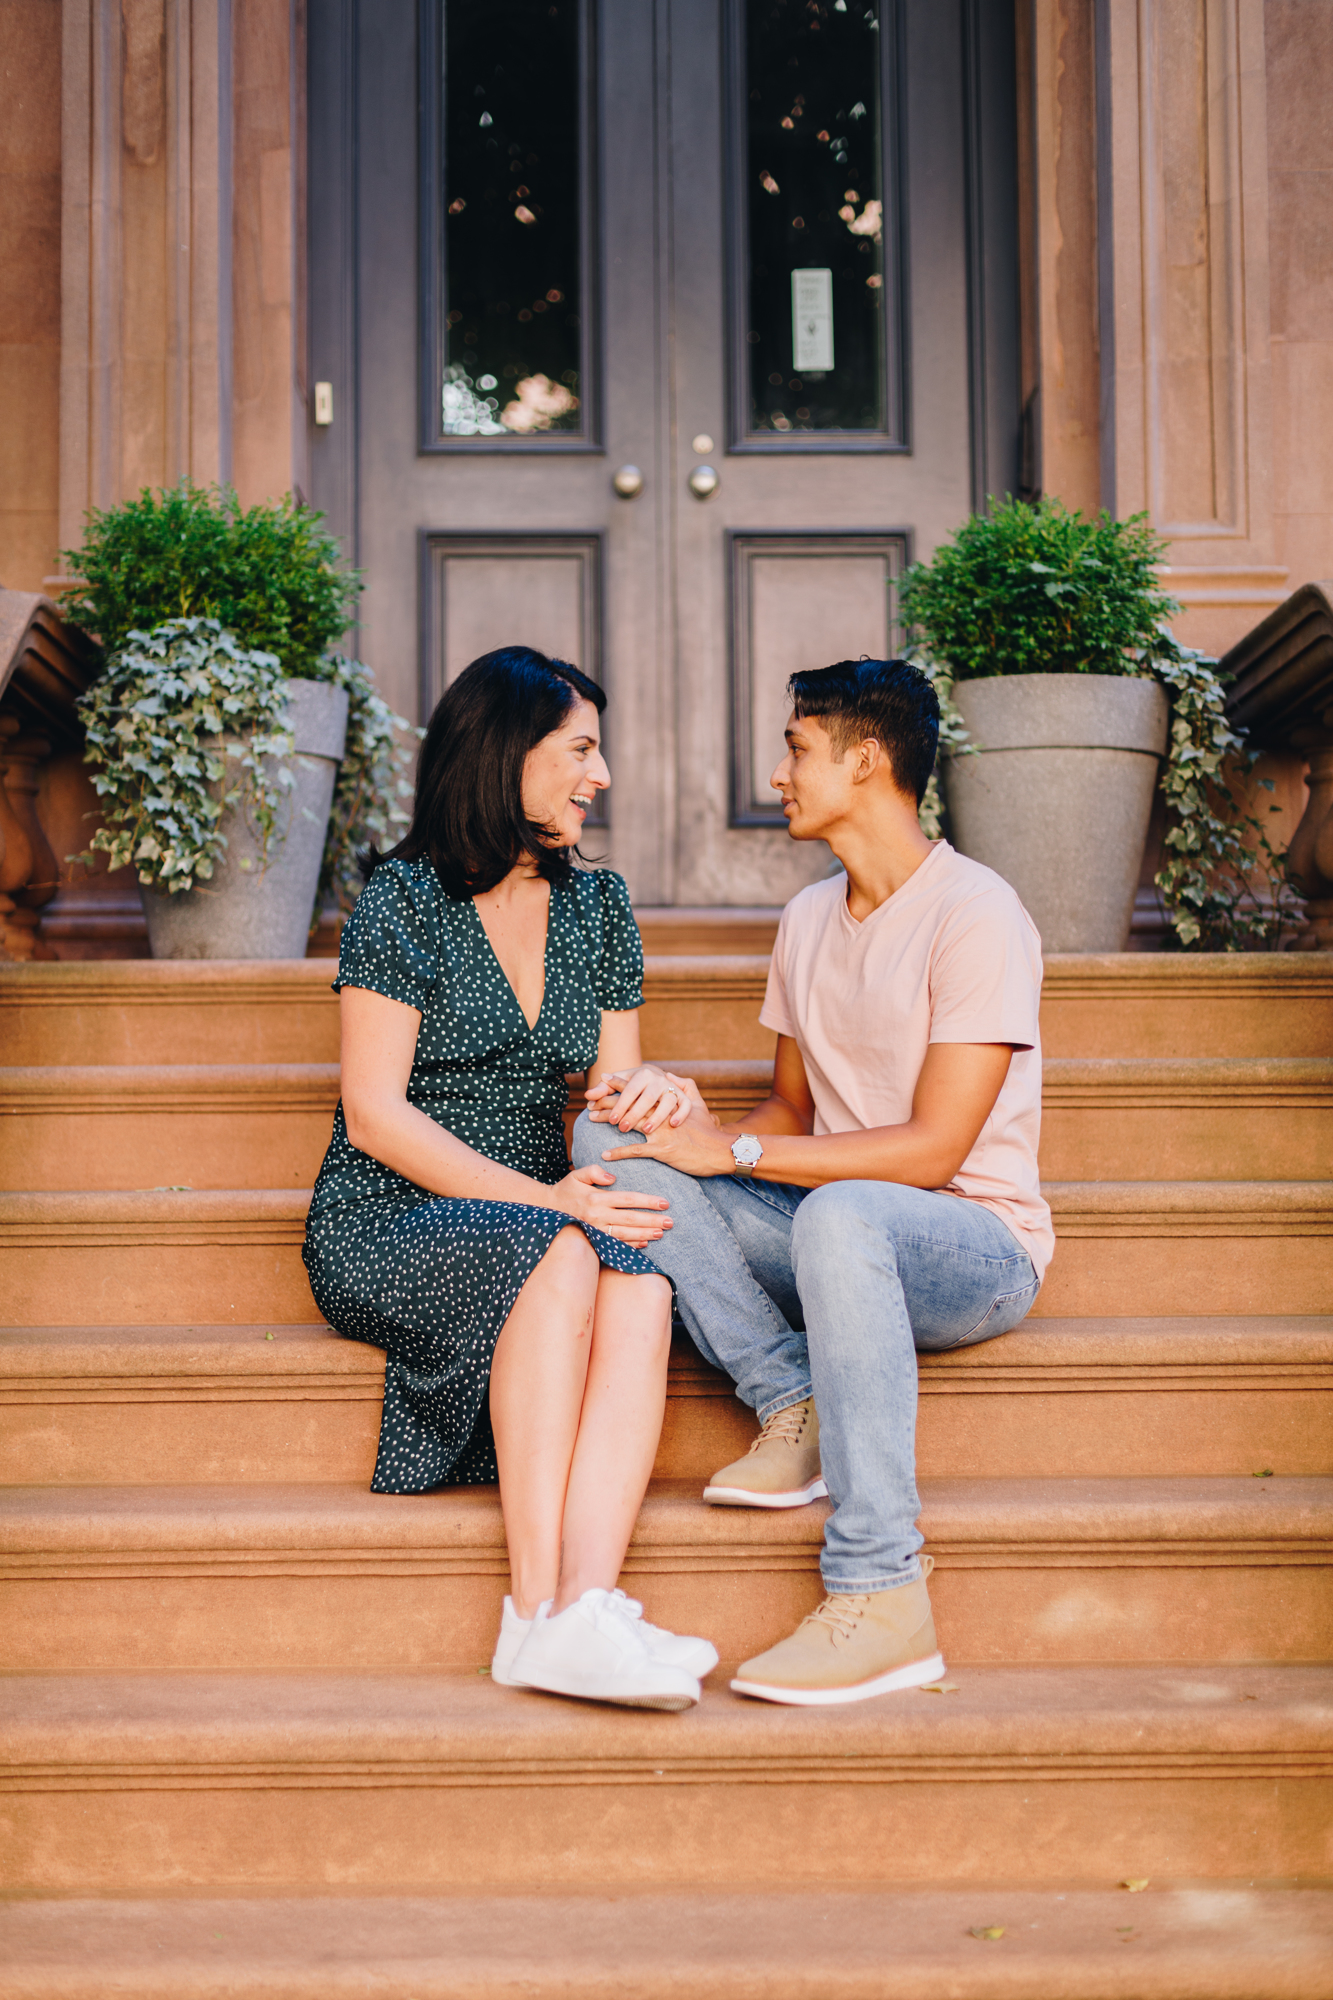 Iconic Brooklyn Heights Promenade Engagement Photos in Summery New York